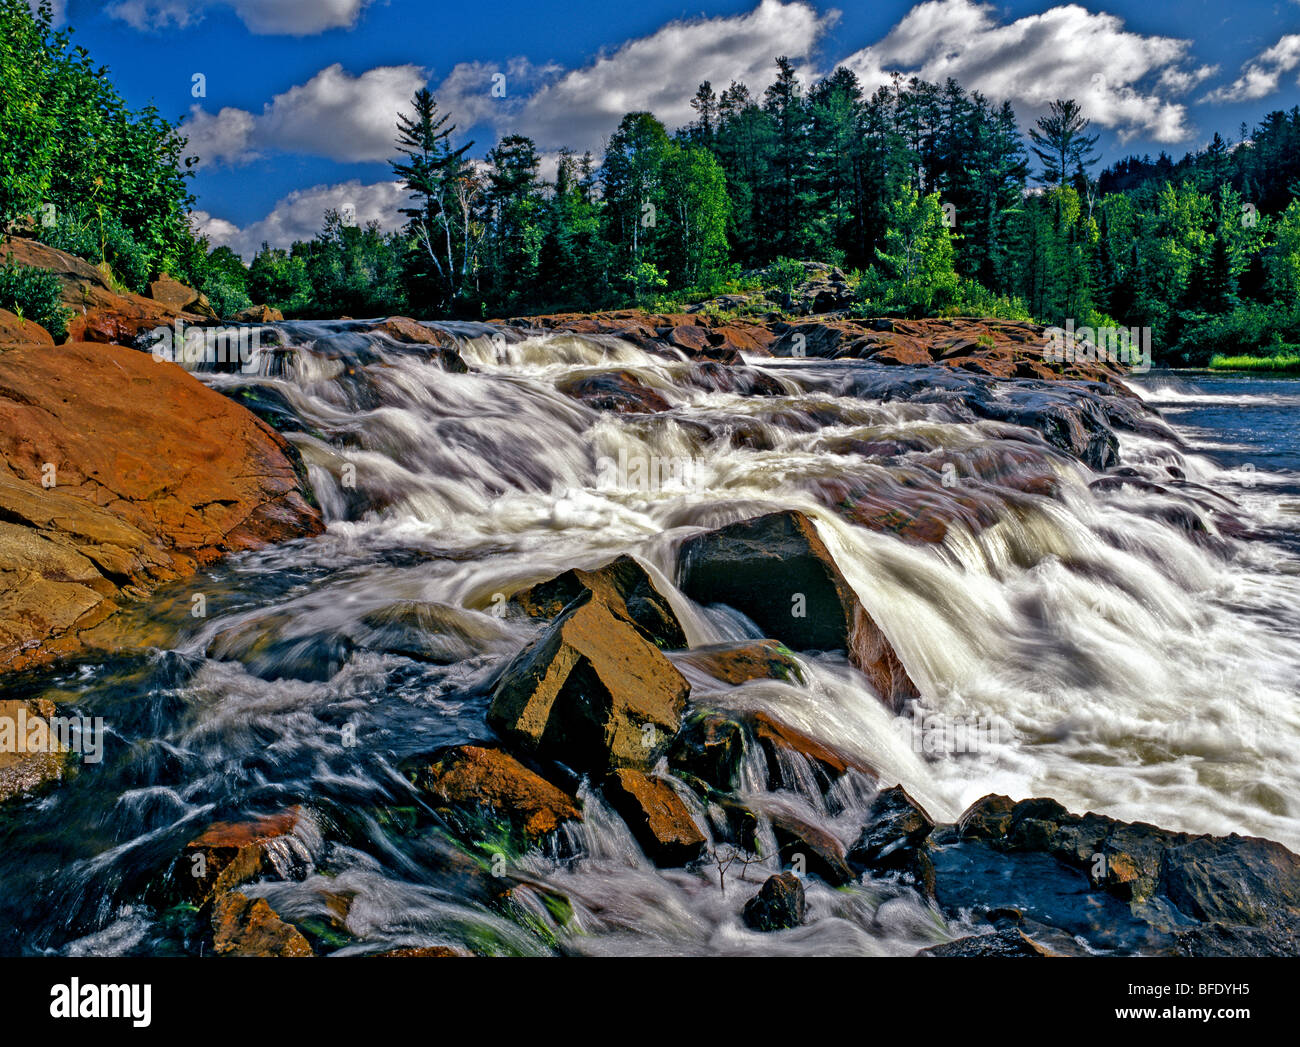 Small waterfall flowing over rocks, Onaping Falls, Ontario, Canada Stock Photo